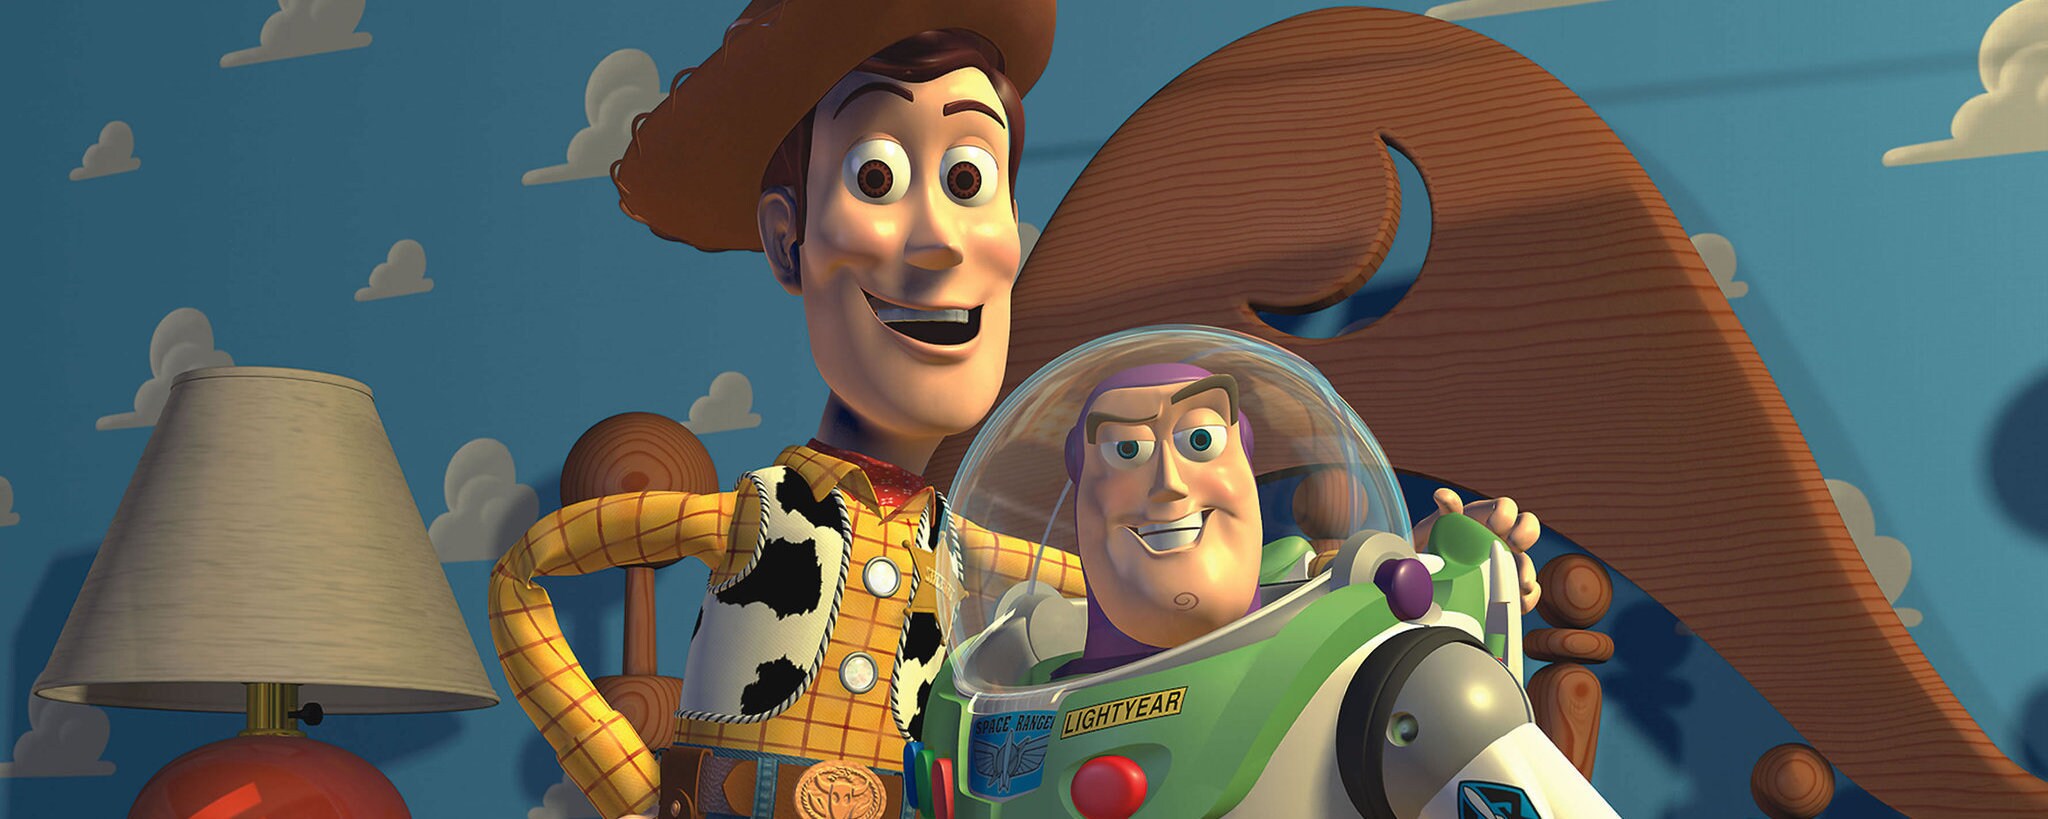 Trilha sonora Toy Story